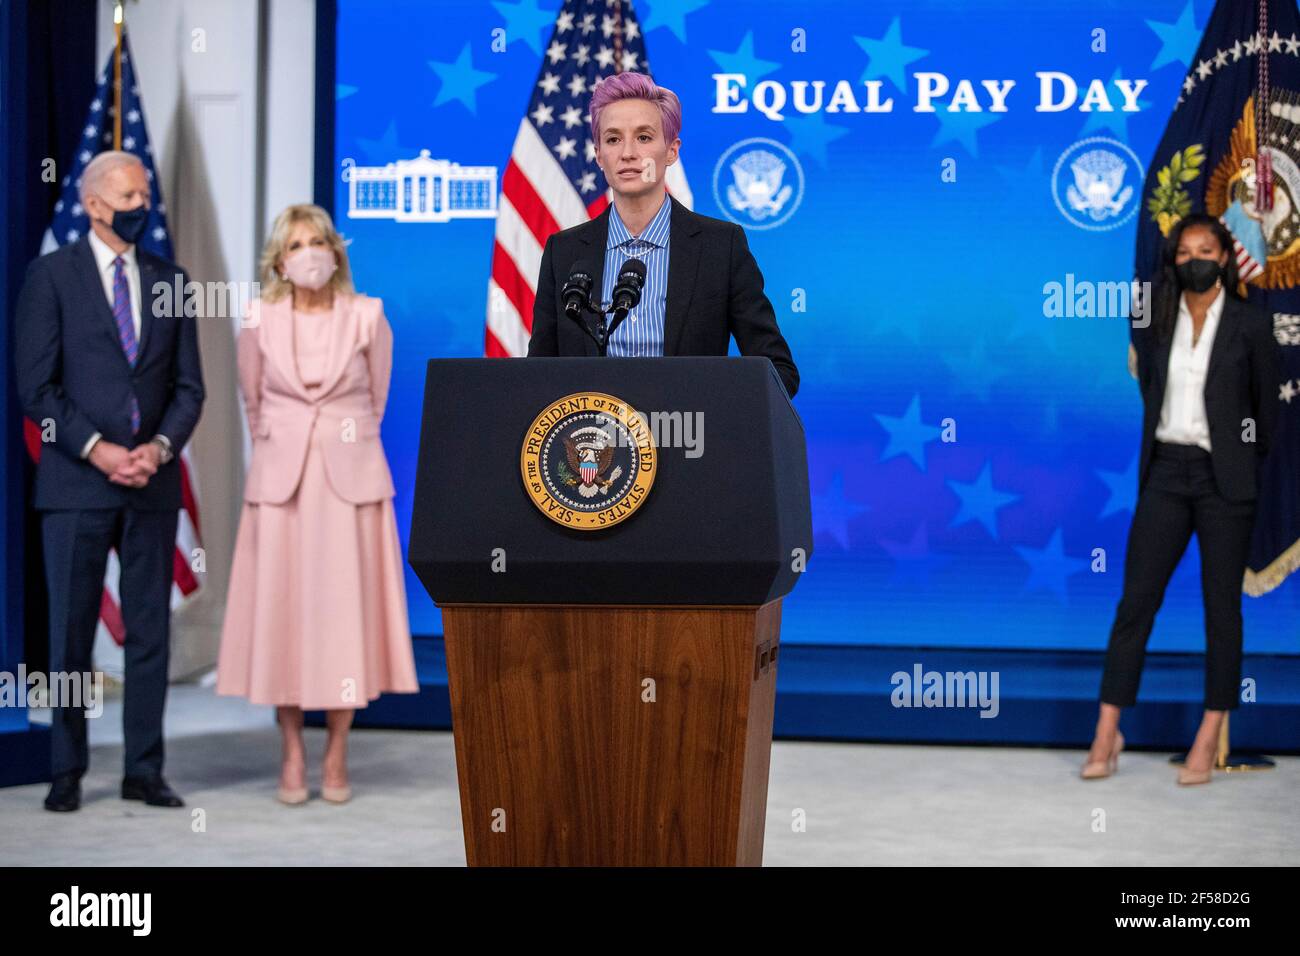 US President Joe Biden and First Lady Dr. Jill Biden listen to remarks by Megan Rapinoe, of the U.S. Soccer Women's National Team, during an event to mark Equal Pay Day in the State Dining Room of the White House in Washington, DC, USA, 24 March 2021. Equal Pay Day marks the extra time it takes an average woman in the United States to earn the same pay that their male counterparts made the previous calendar year.Credit: Shawn Thew/Pool via CNP/MediaPunch Stock Photo